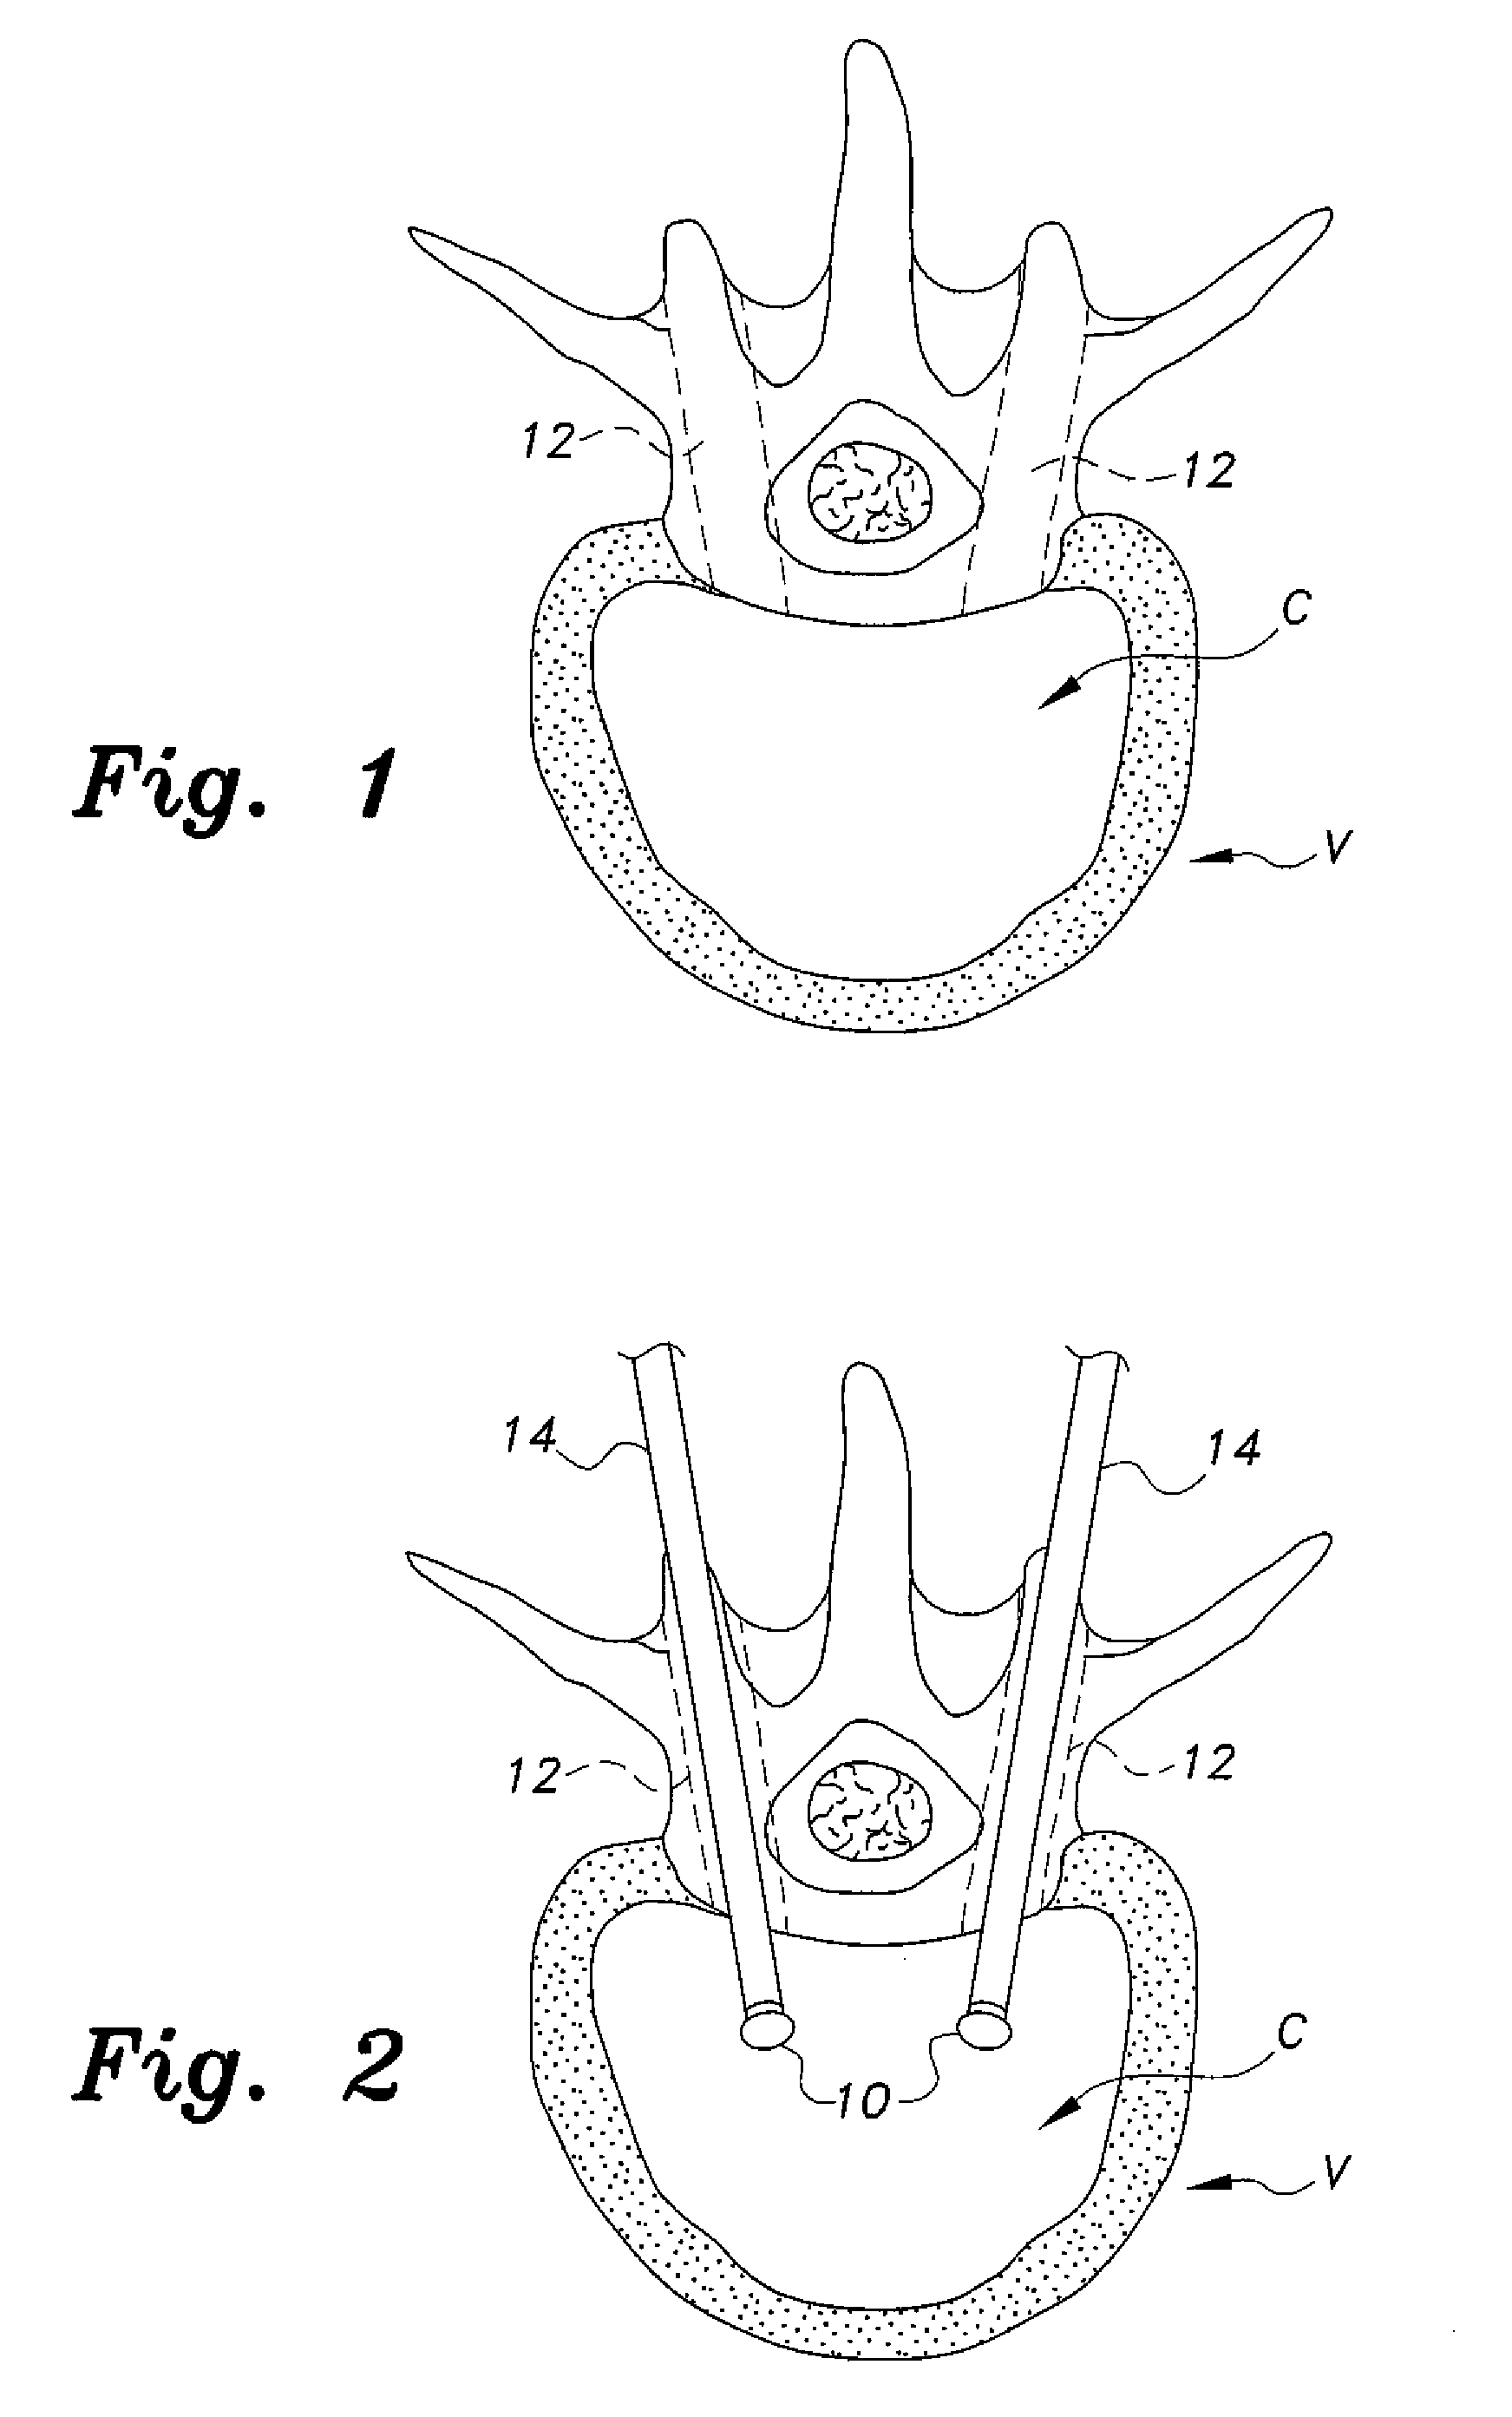 Device and method to prevent extravasation of bone cement used in balloon kyphoplasty